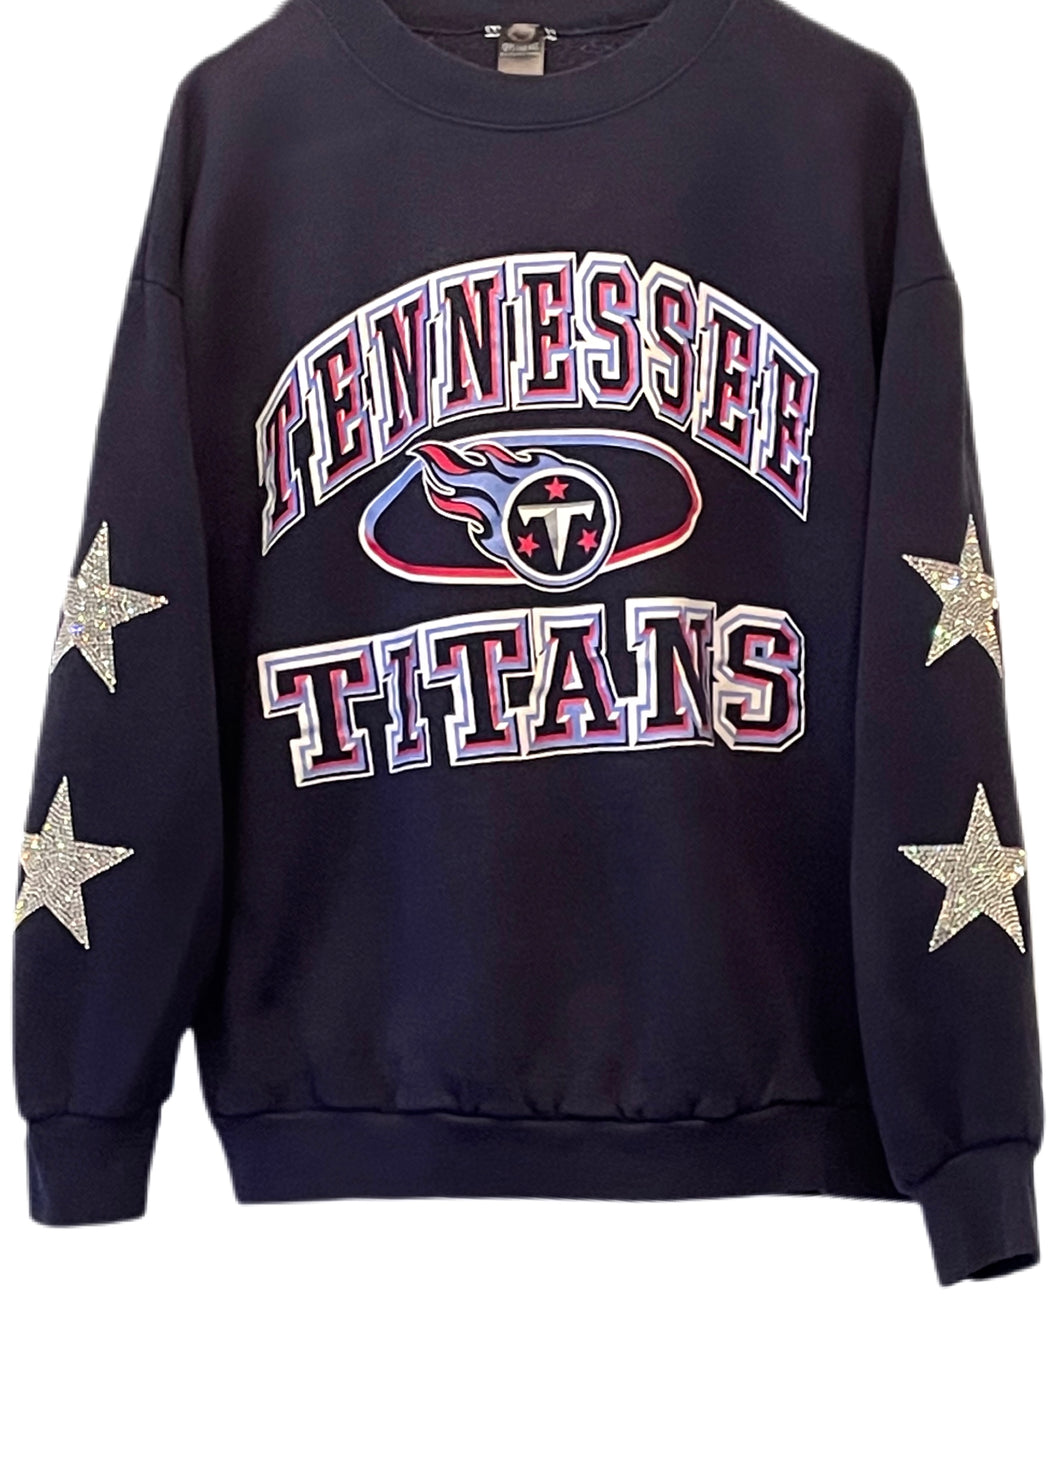 Tennessee Titans, NFL One of a KIND Vintage Sweatshirt with Crystal Star Design